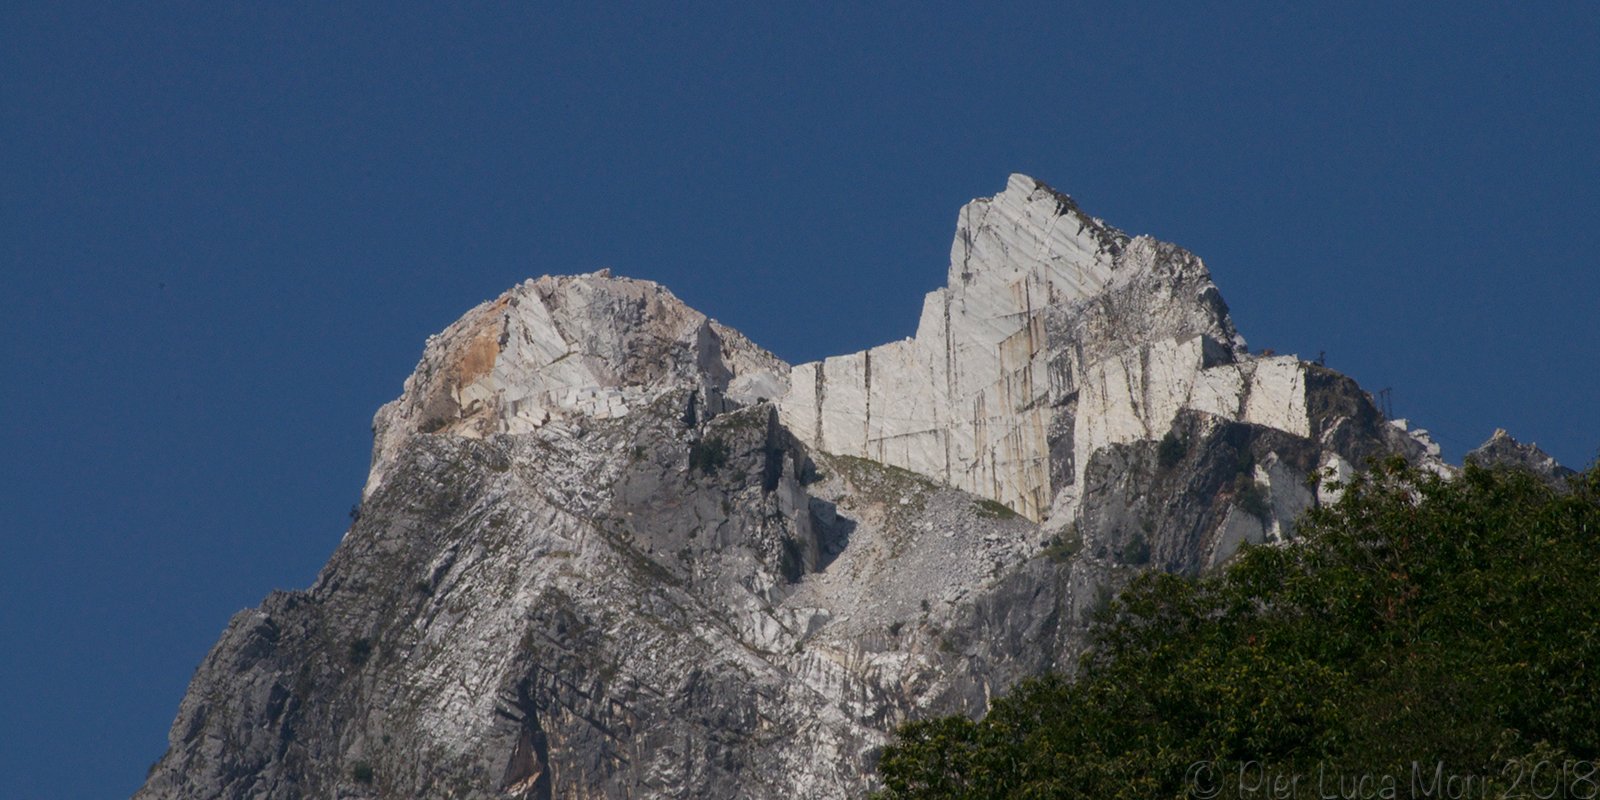 The Marble quarries on the Apuan Alps